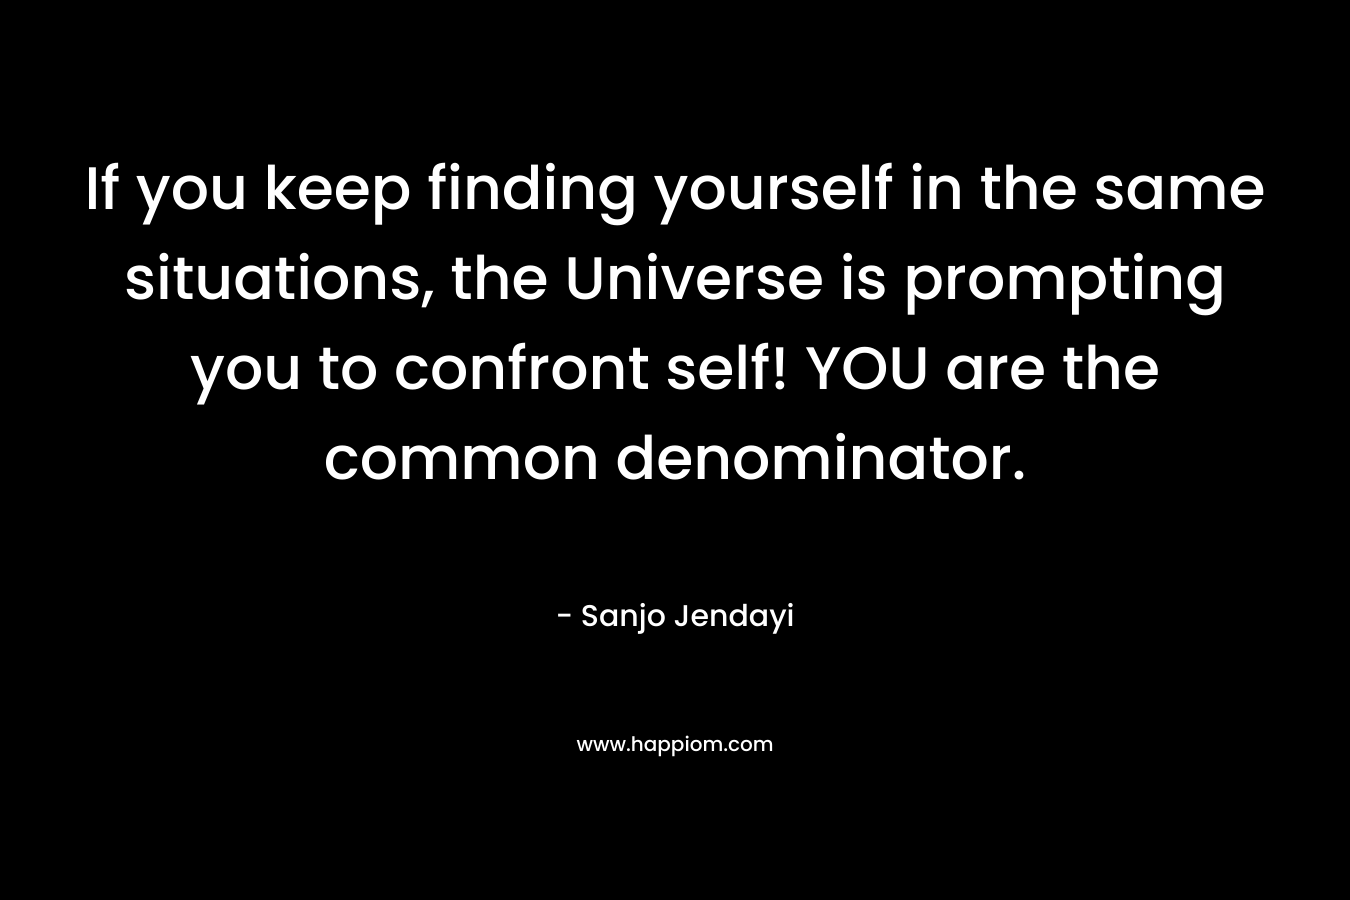 If you keep finding yourself in the same situations, the Universe is prompting you to confront self! YOU are the common denominator. – Sanjo Jendayi